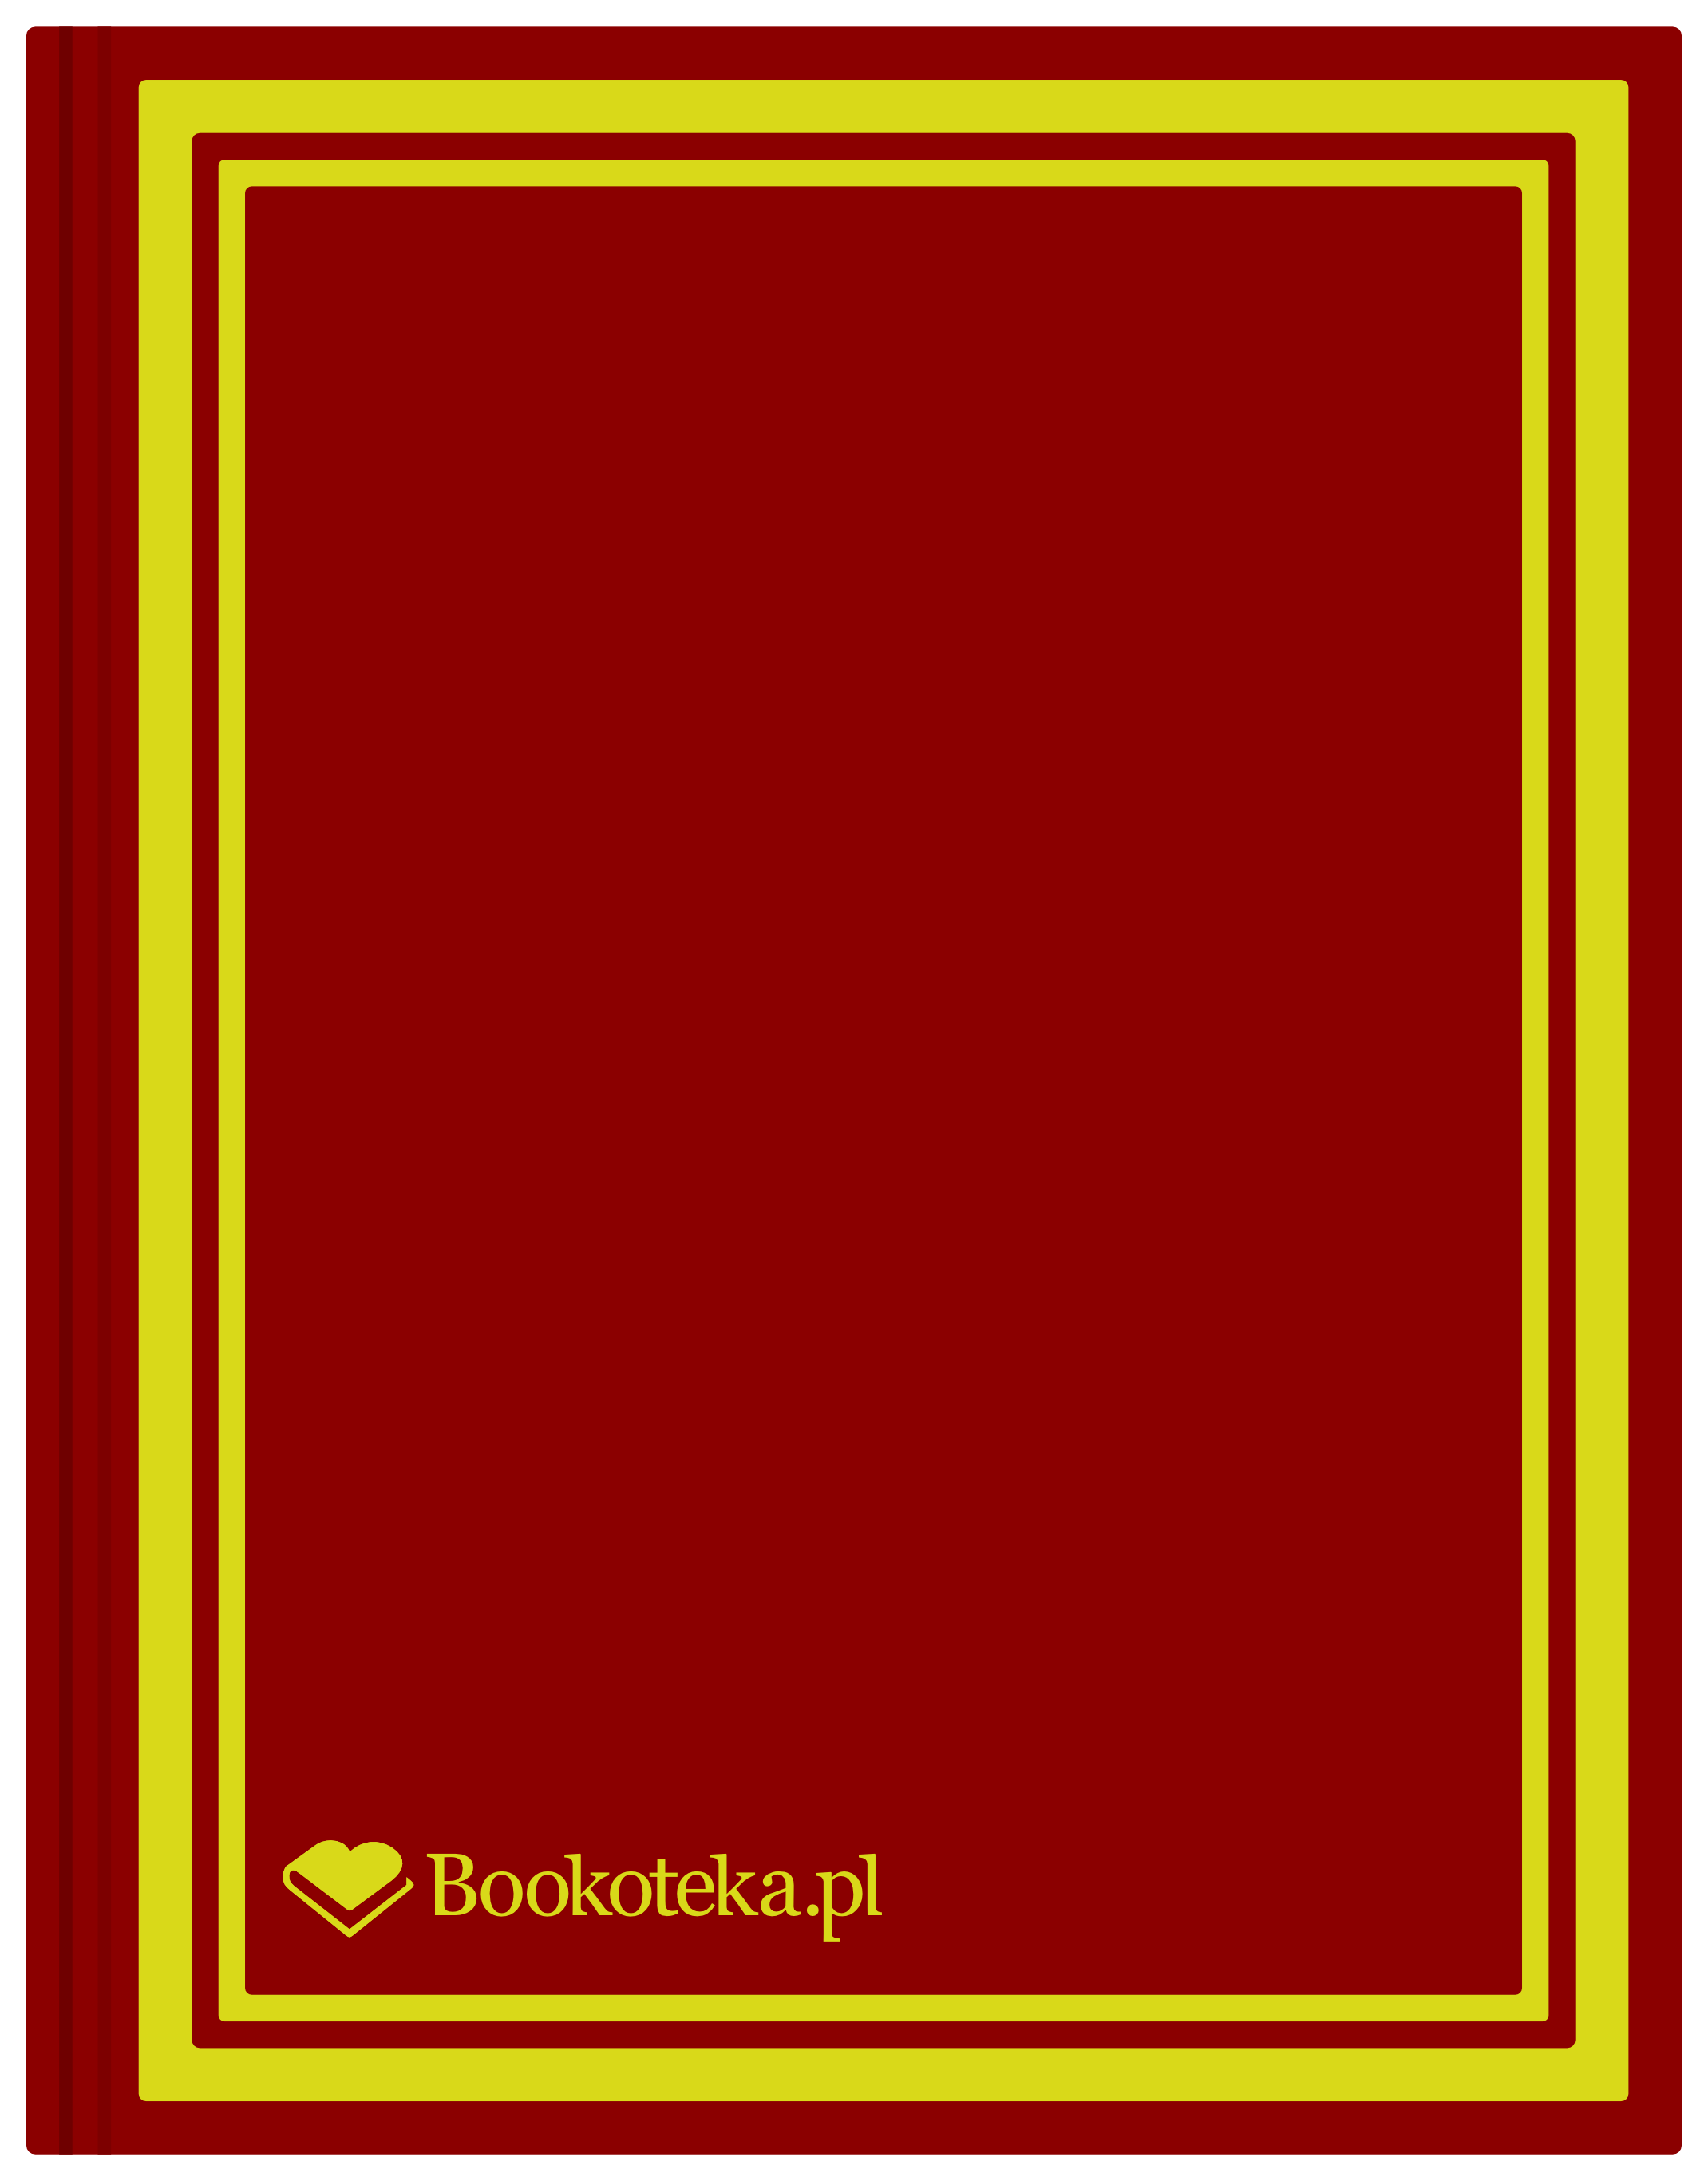 librarian/res/cover-bookoteka.png